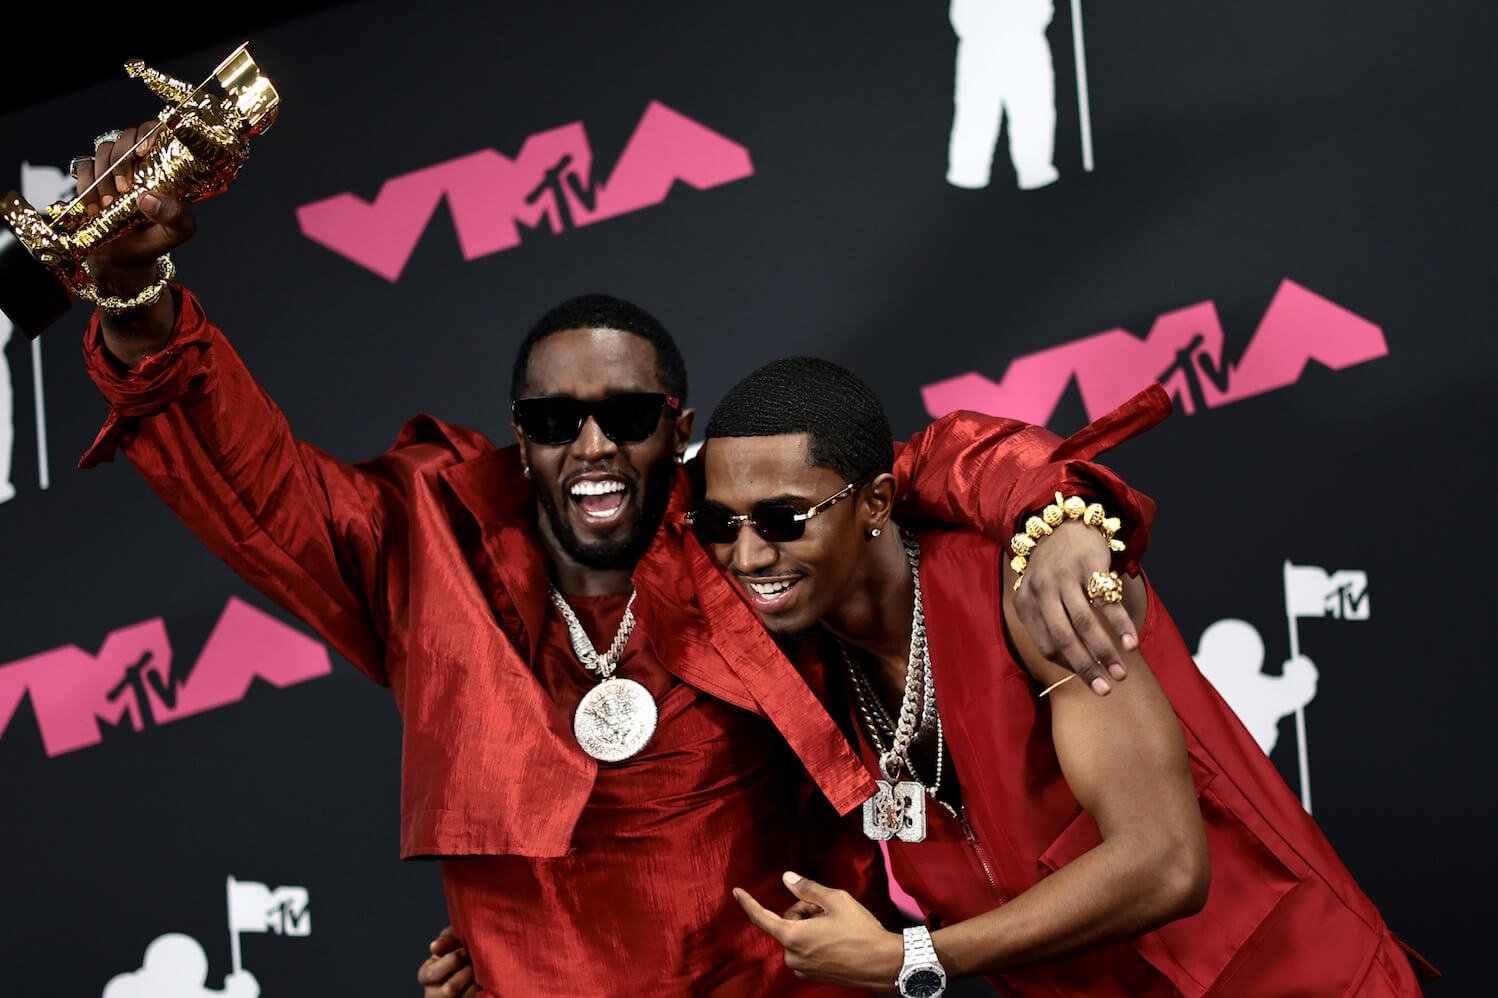 Sean 'P. Diddy' Combs holding up an award at the MTV VMAs while hugging his son, Christian 'King' Combs. They both look elated.